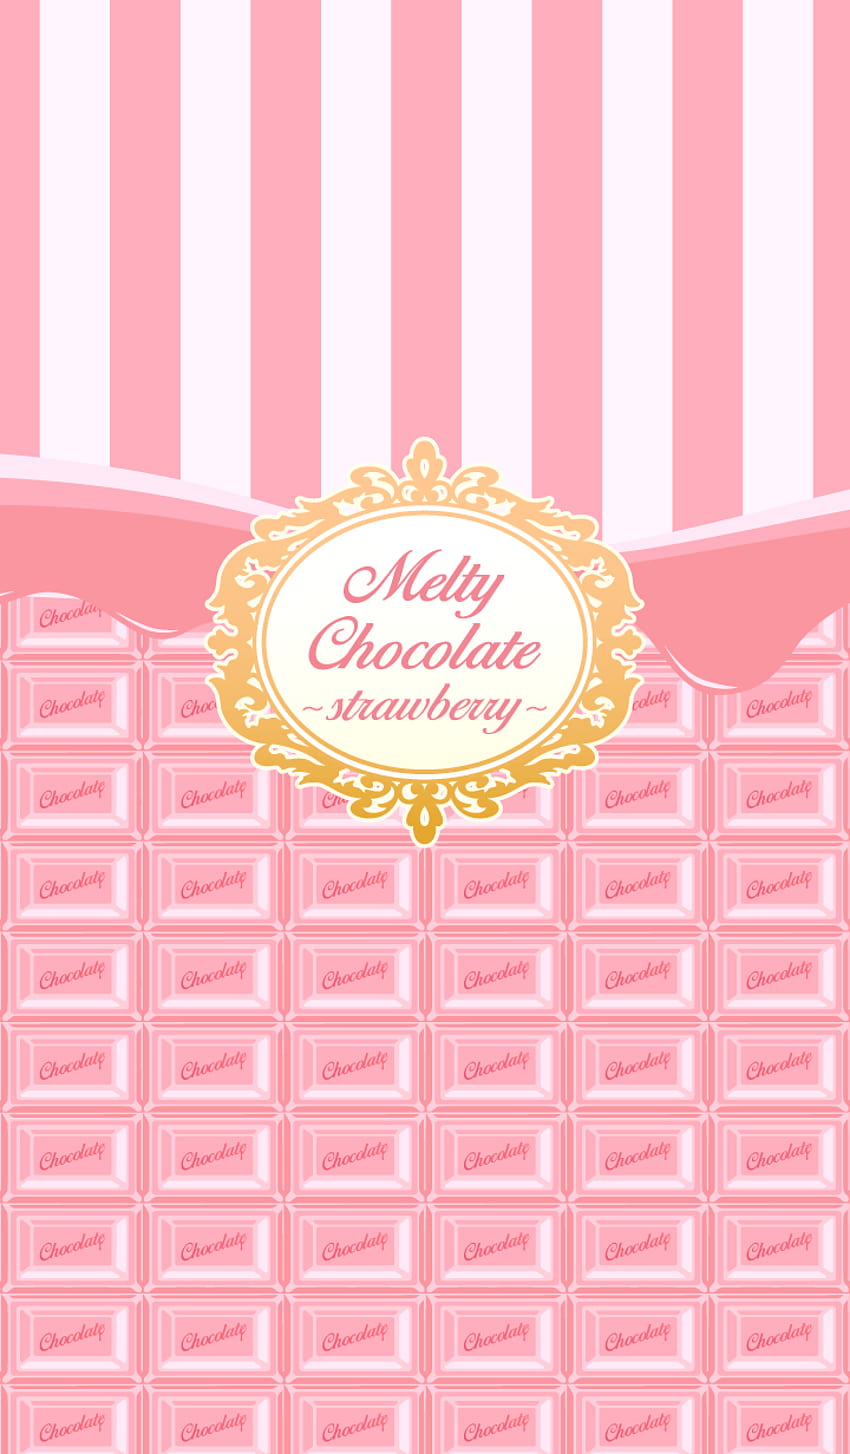 This is a theme of melting chocolate bar. lovely strawberry chocolate flavor version. pink color., candy bar HD phone wallpaper